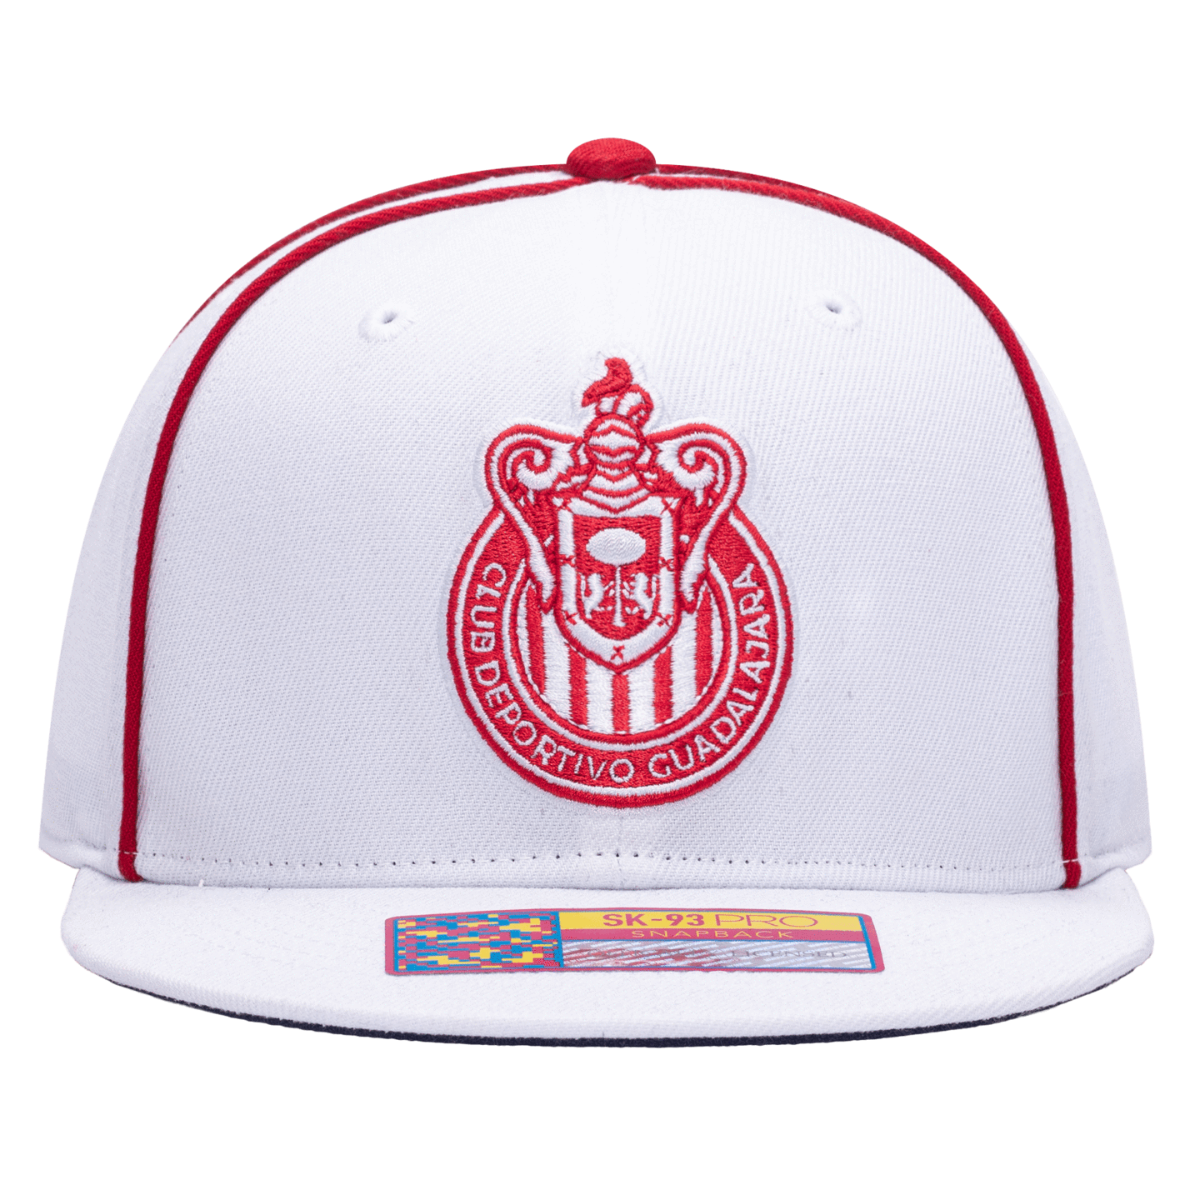 FI Collection Chivas Cali Day Snapback Hat - White-Red (Front)